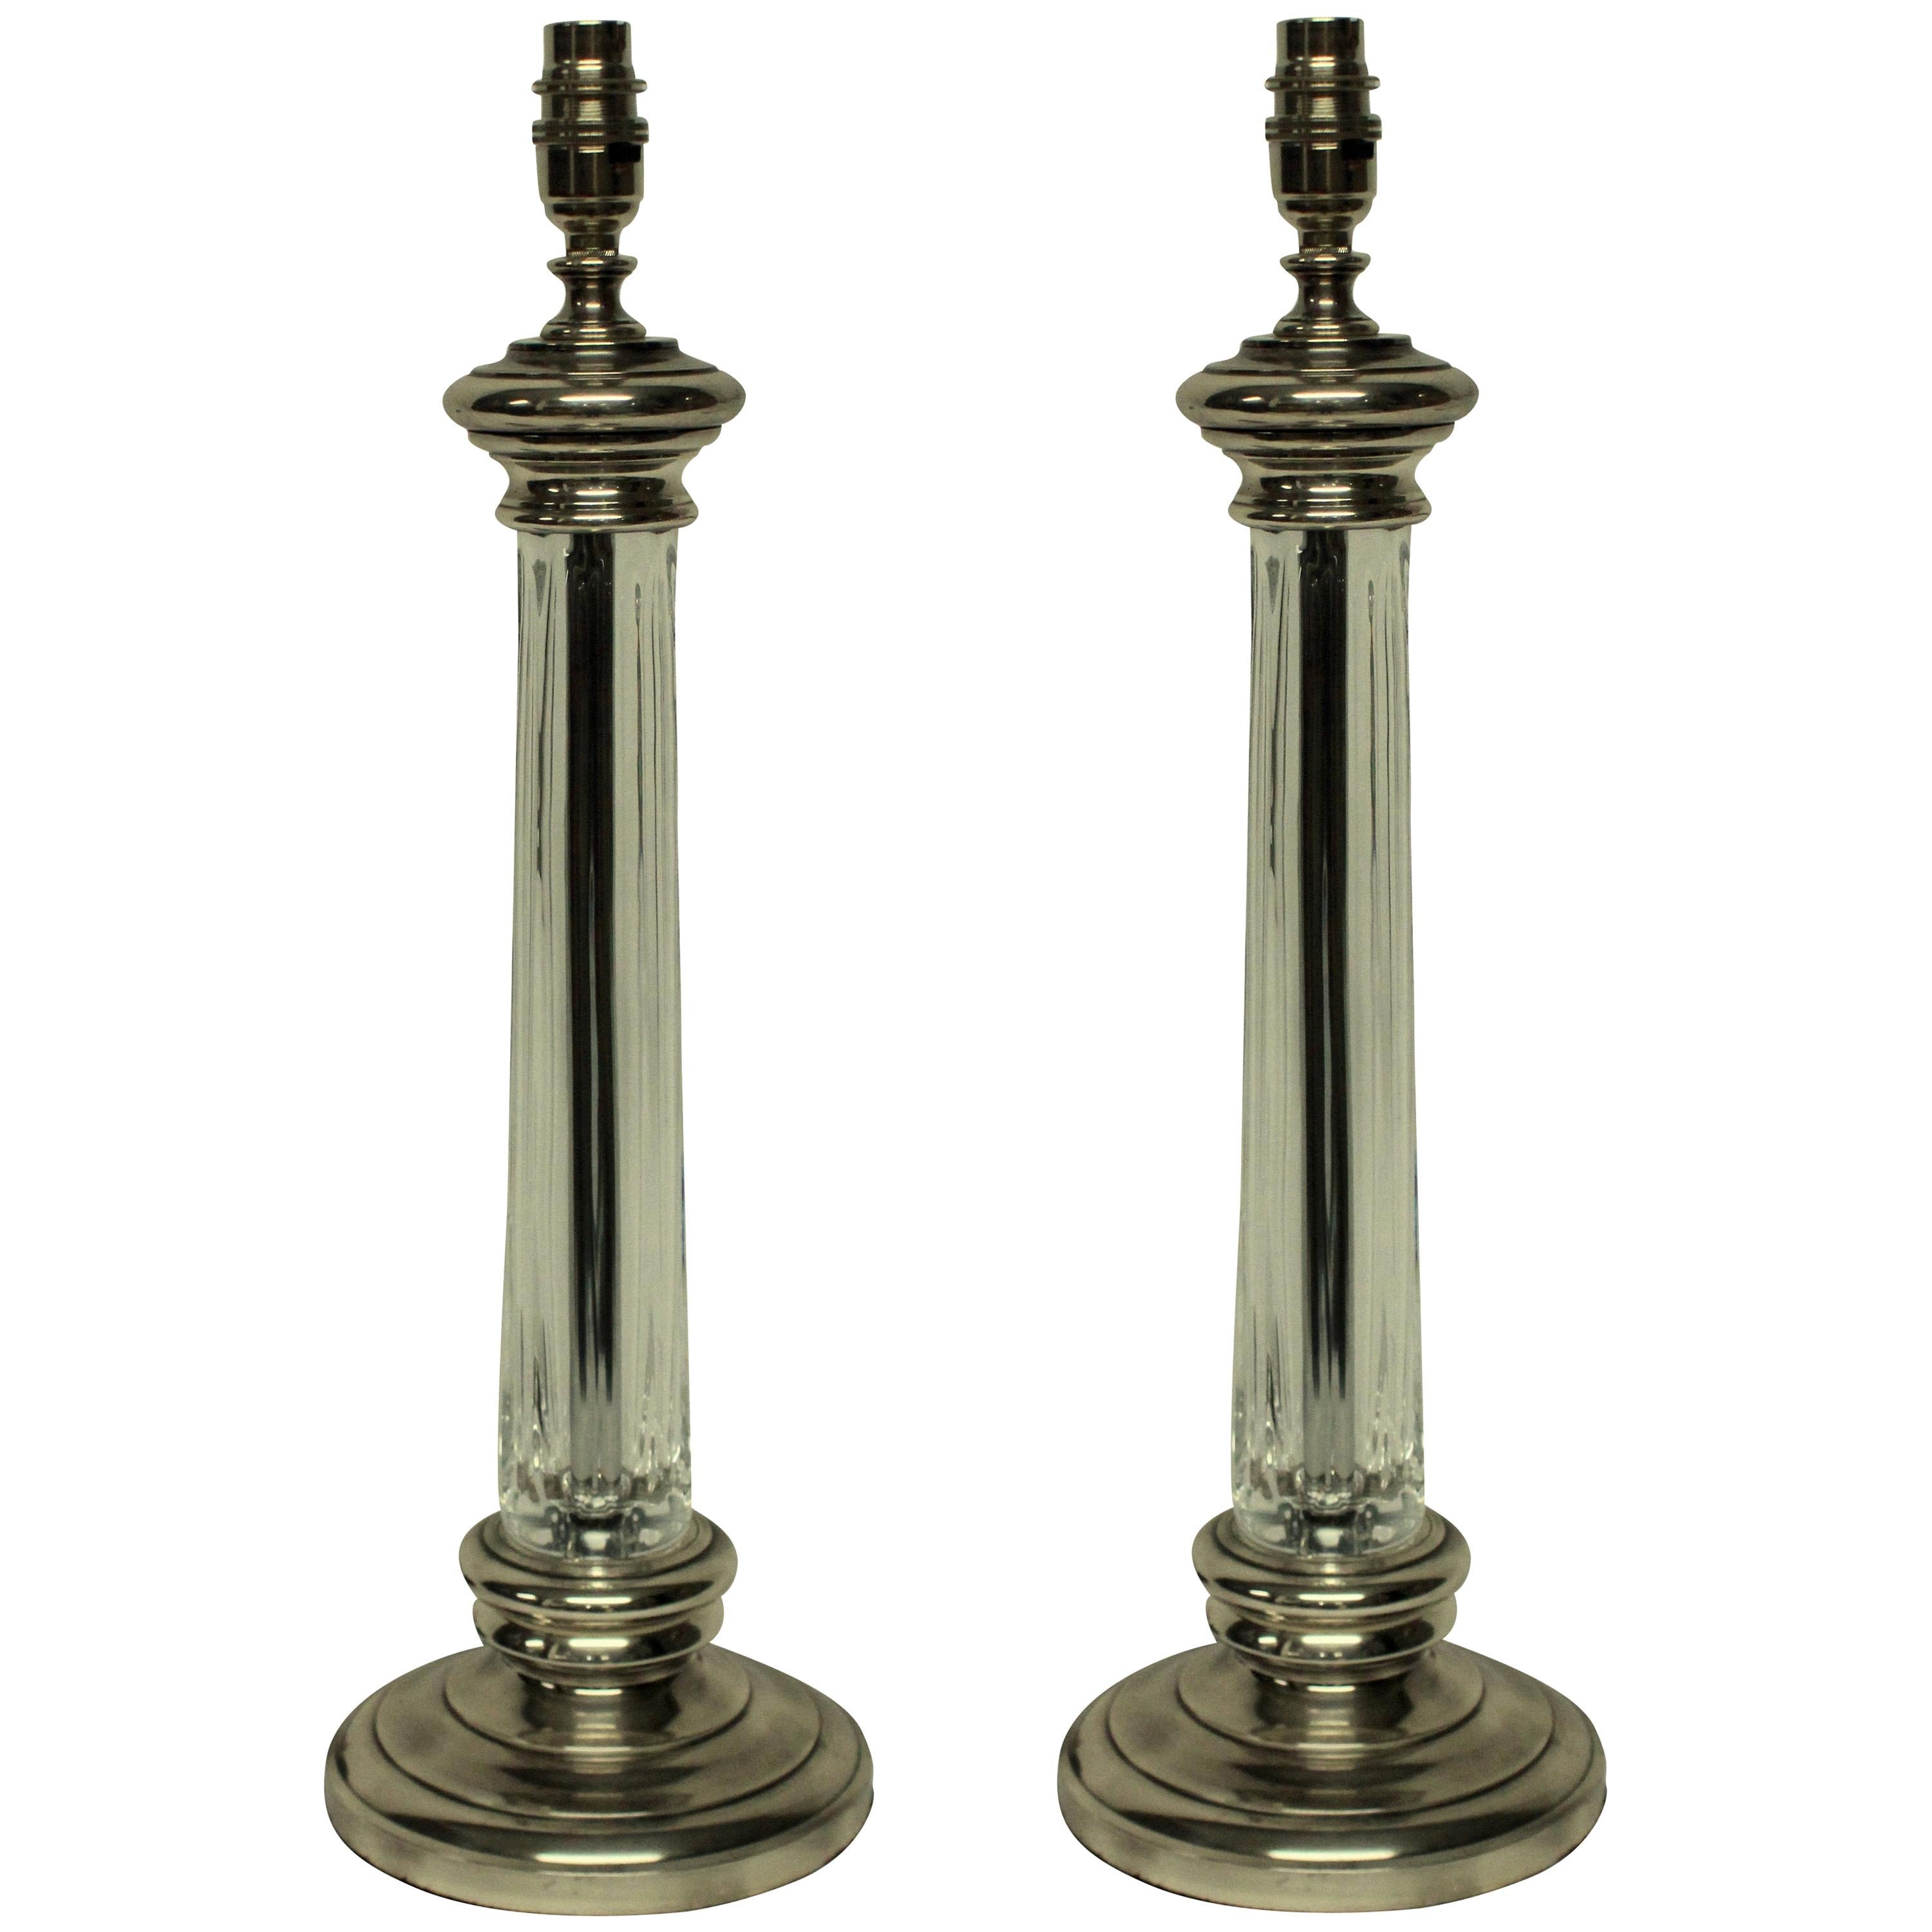 Pair of English Silver & Cut-Glass Column Lamps